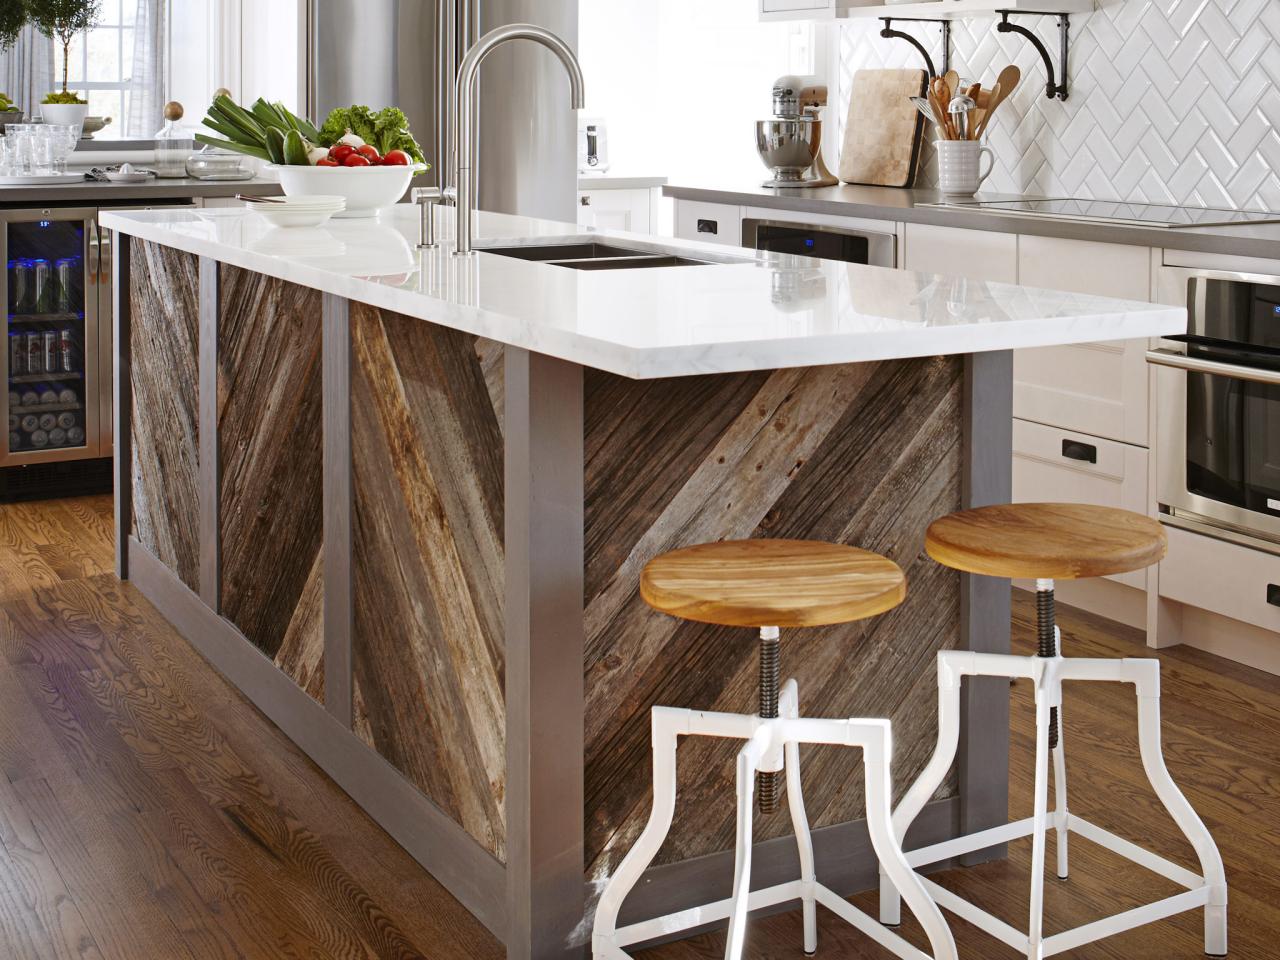 Unfinished Kitchen Islands Pictures Ideas From Hgtv Hgtv